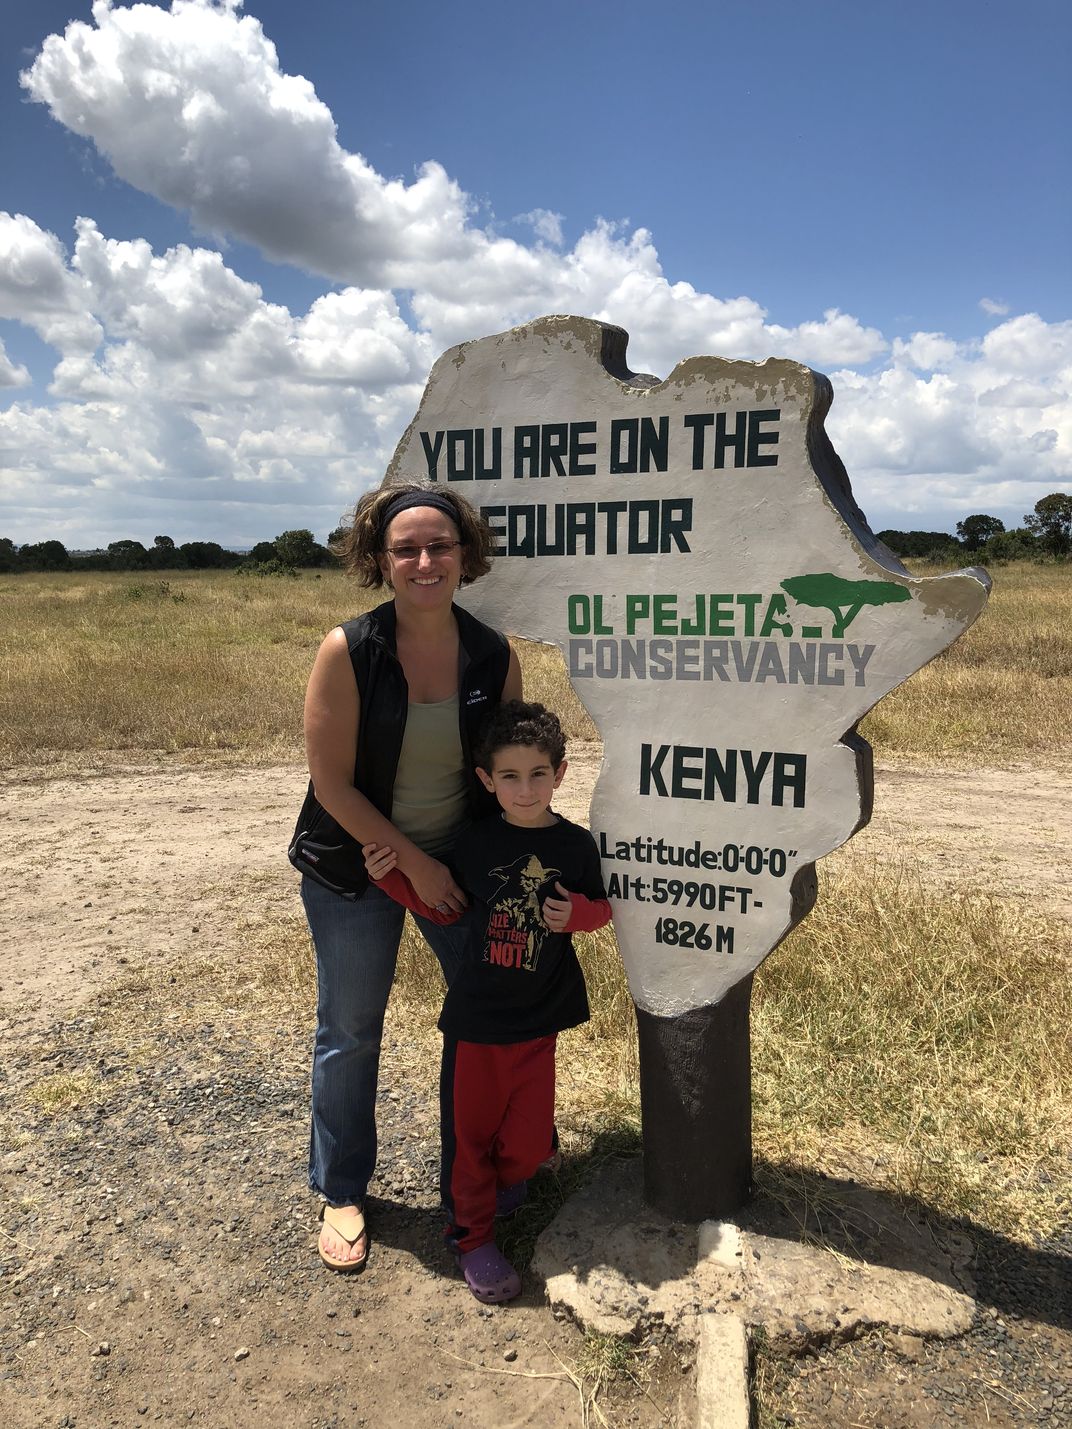 A young boy and adult woman next to a white sign marking the equator in Kenya.